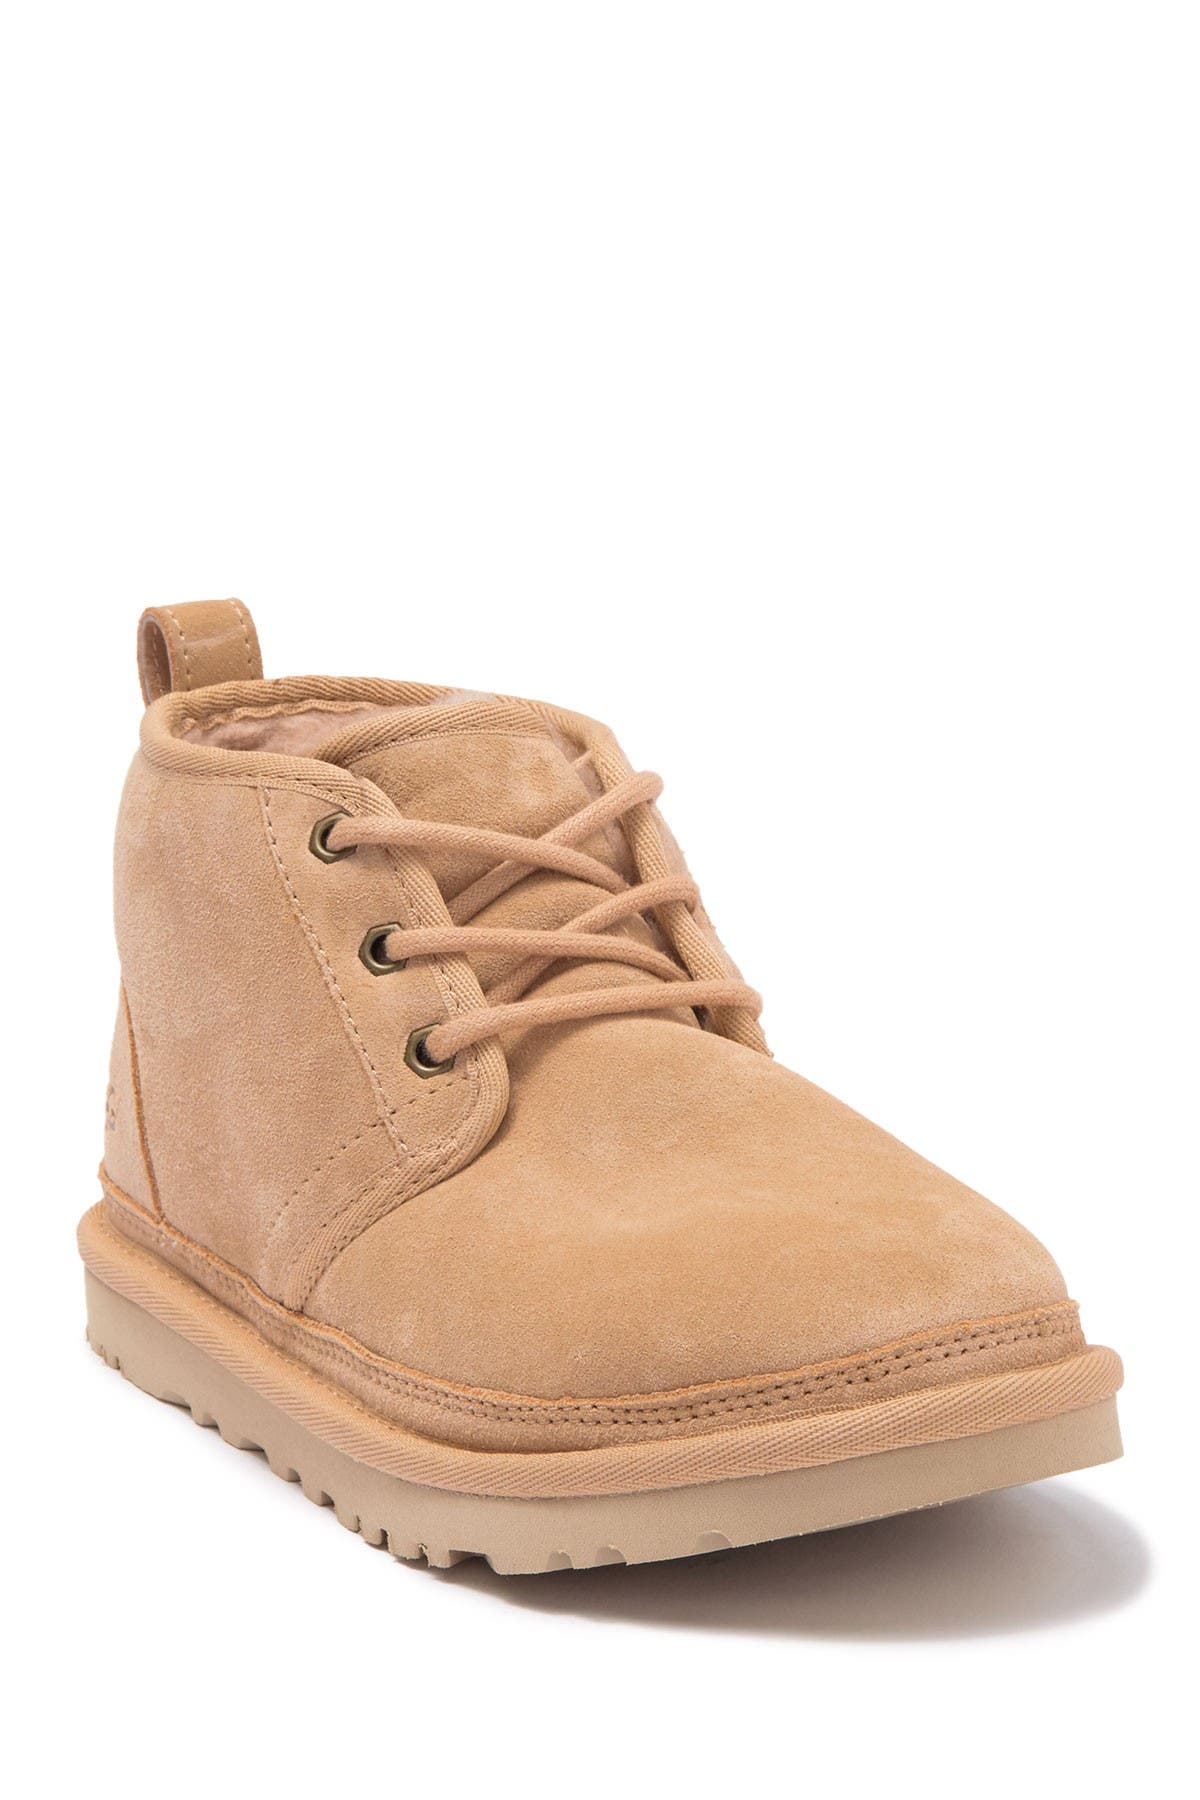 UGG | Neumel Faux Fur Lined Chukka Boot 